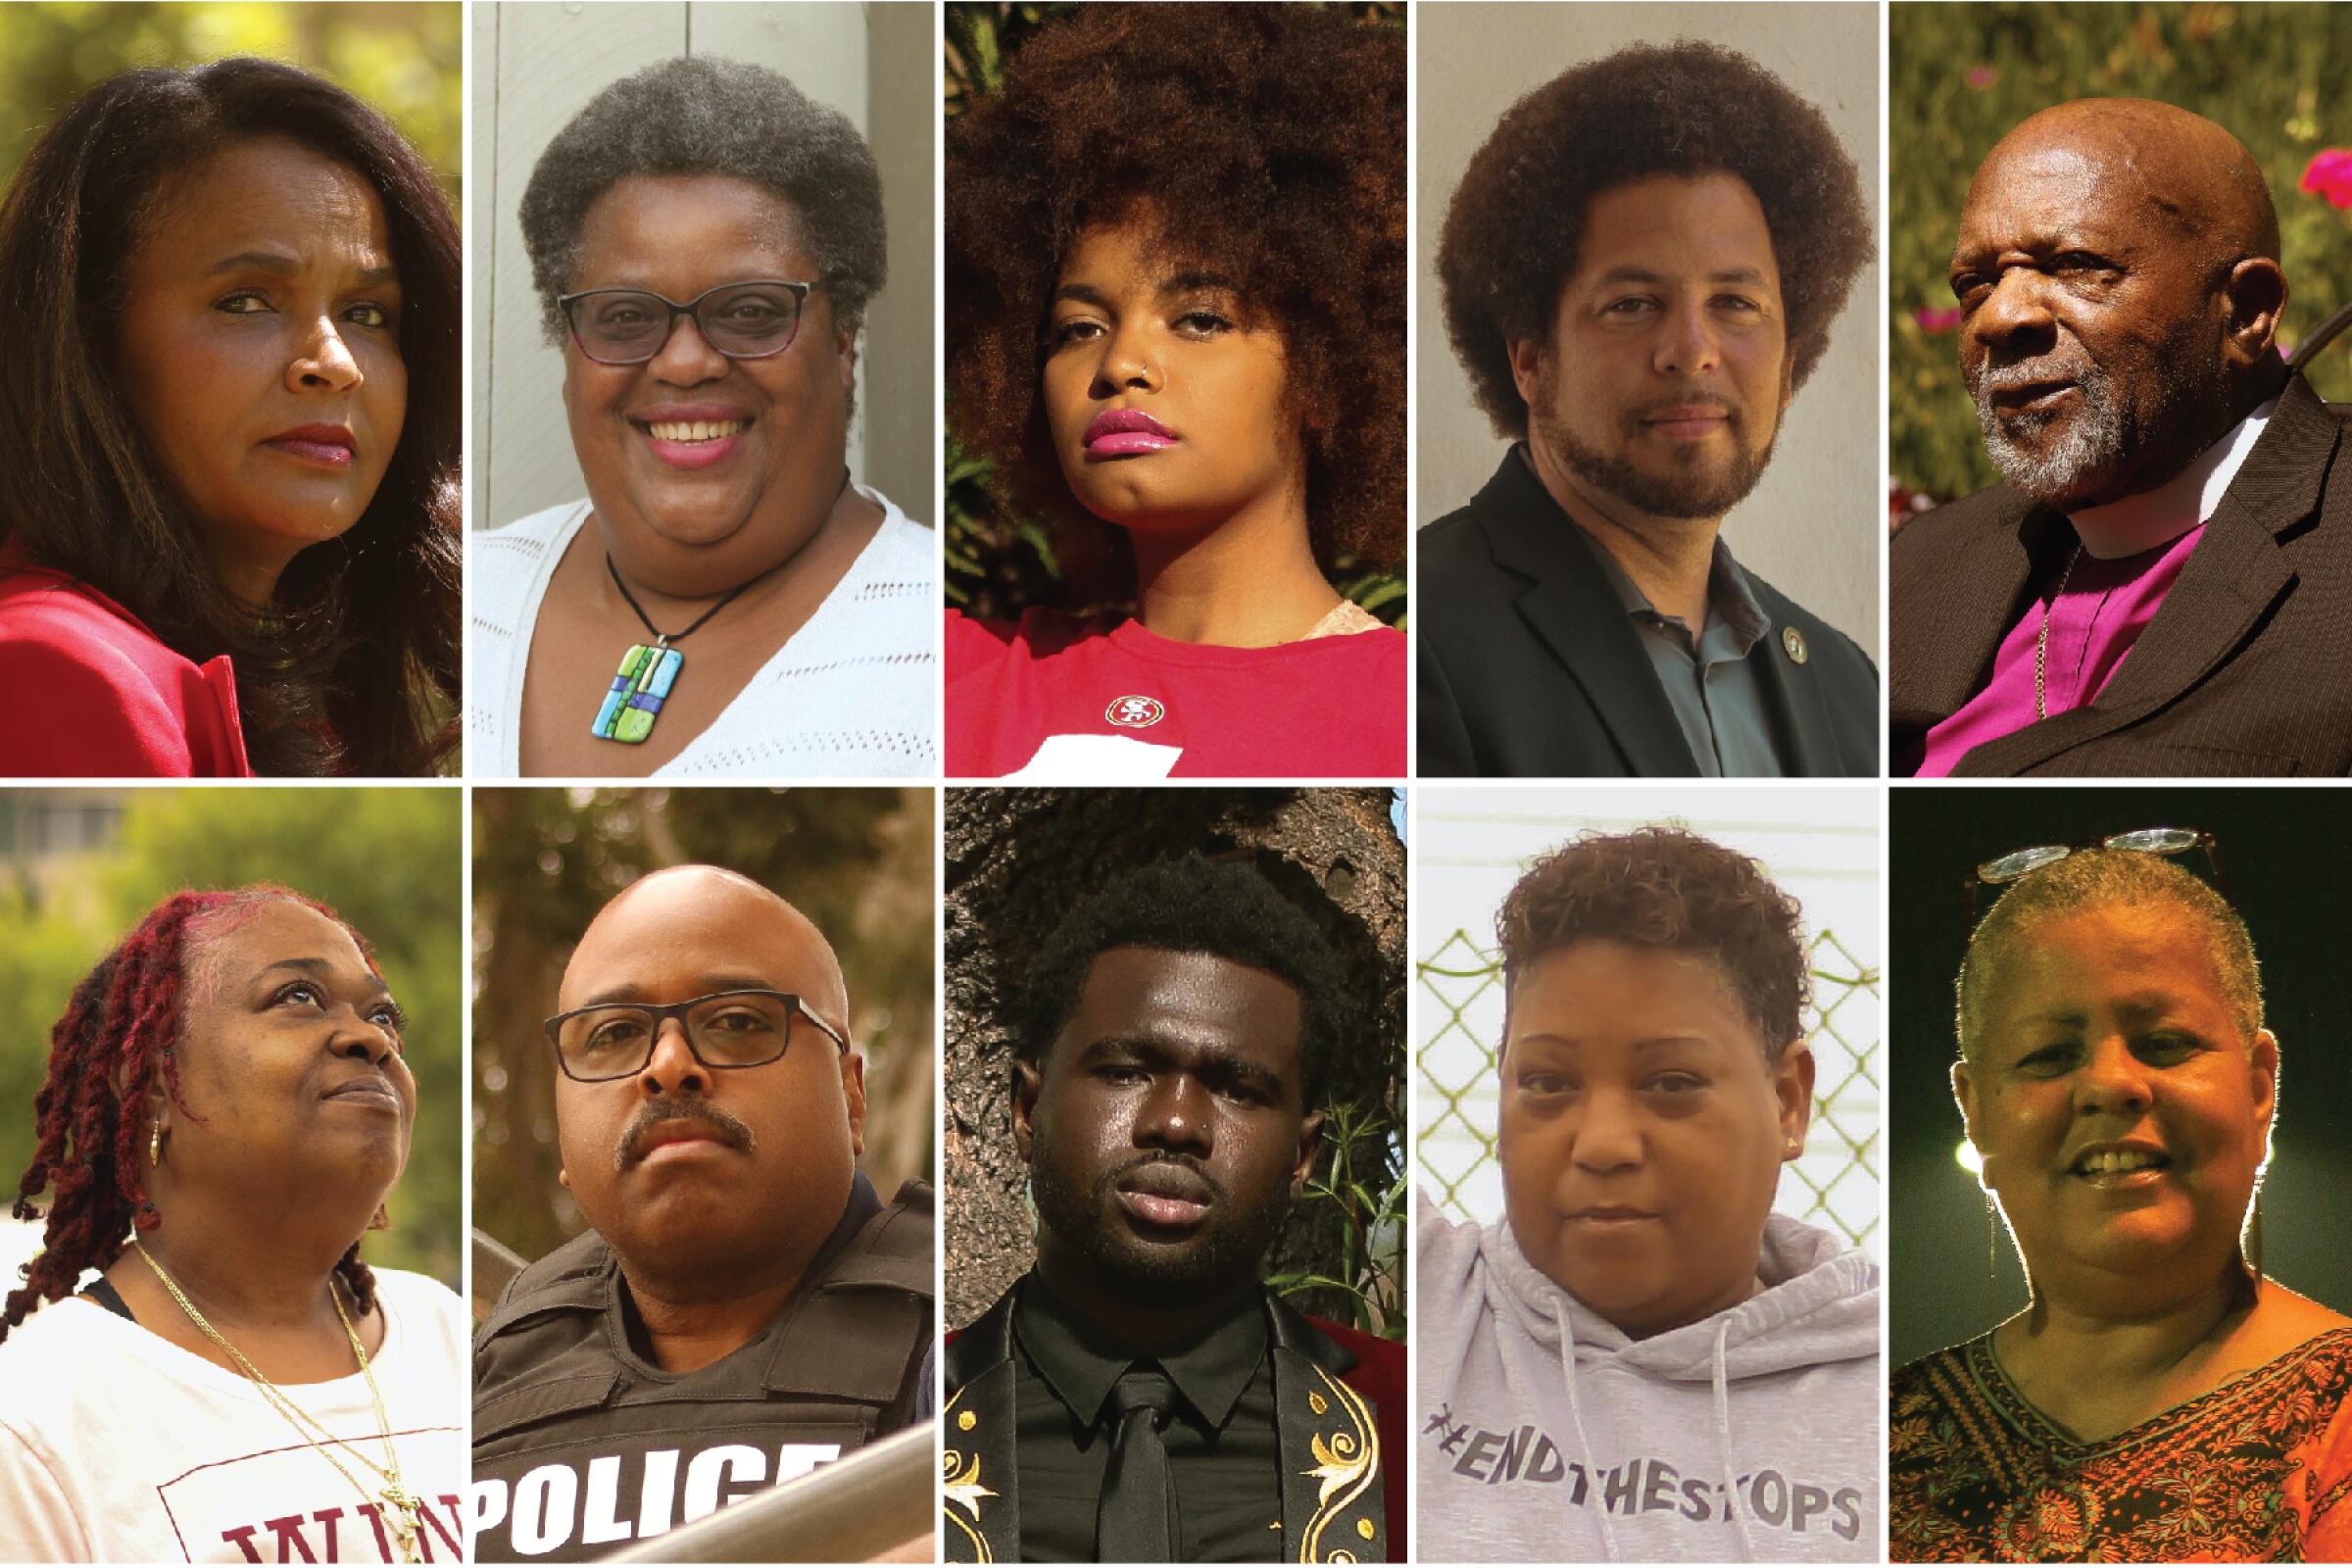 Community voices on racism in America